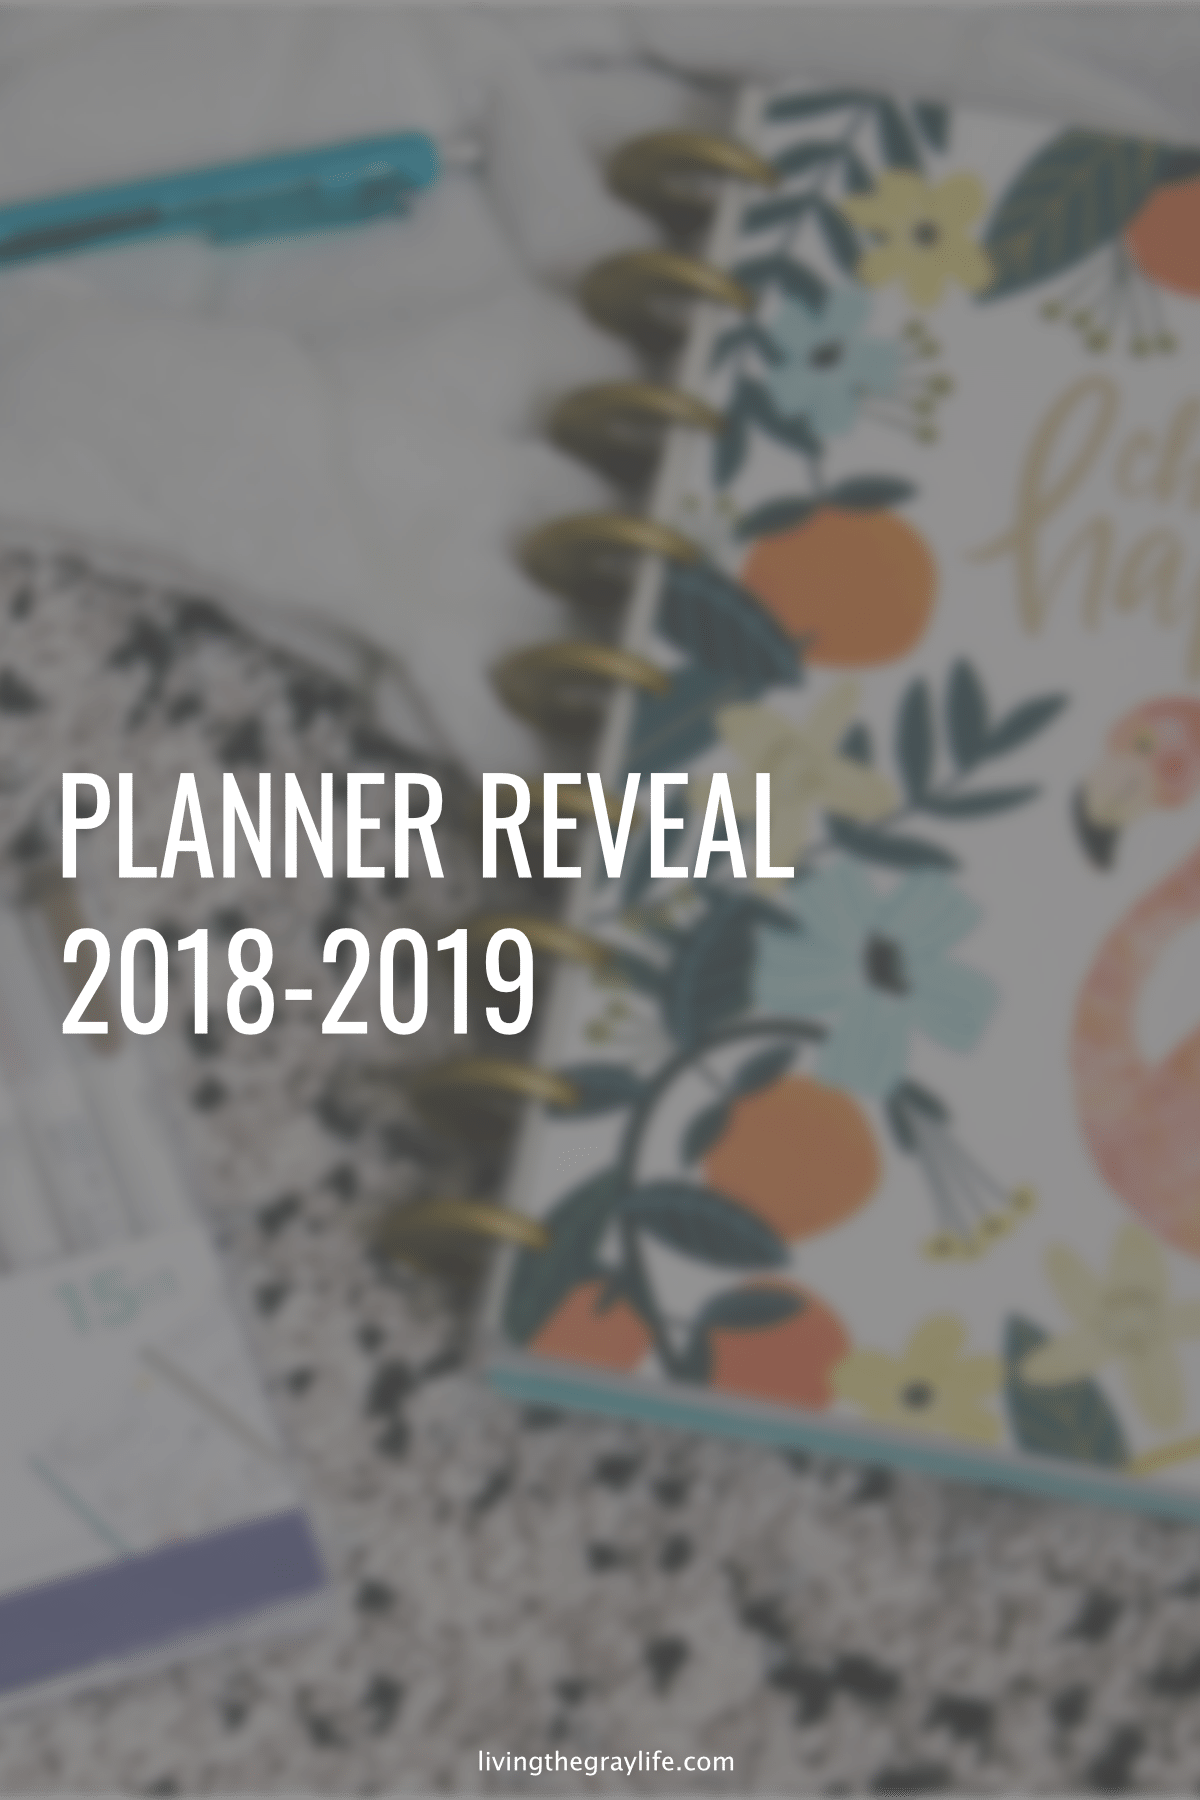 The Happy Planner Reveal